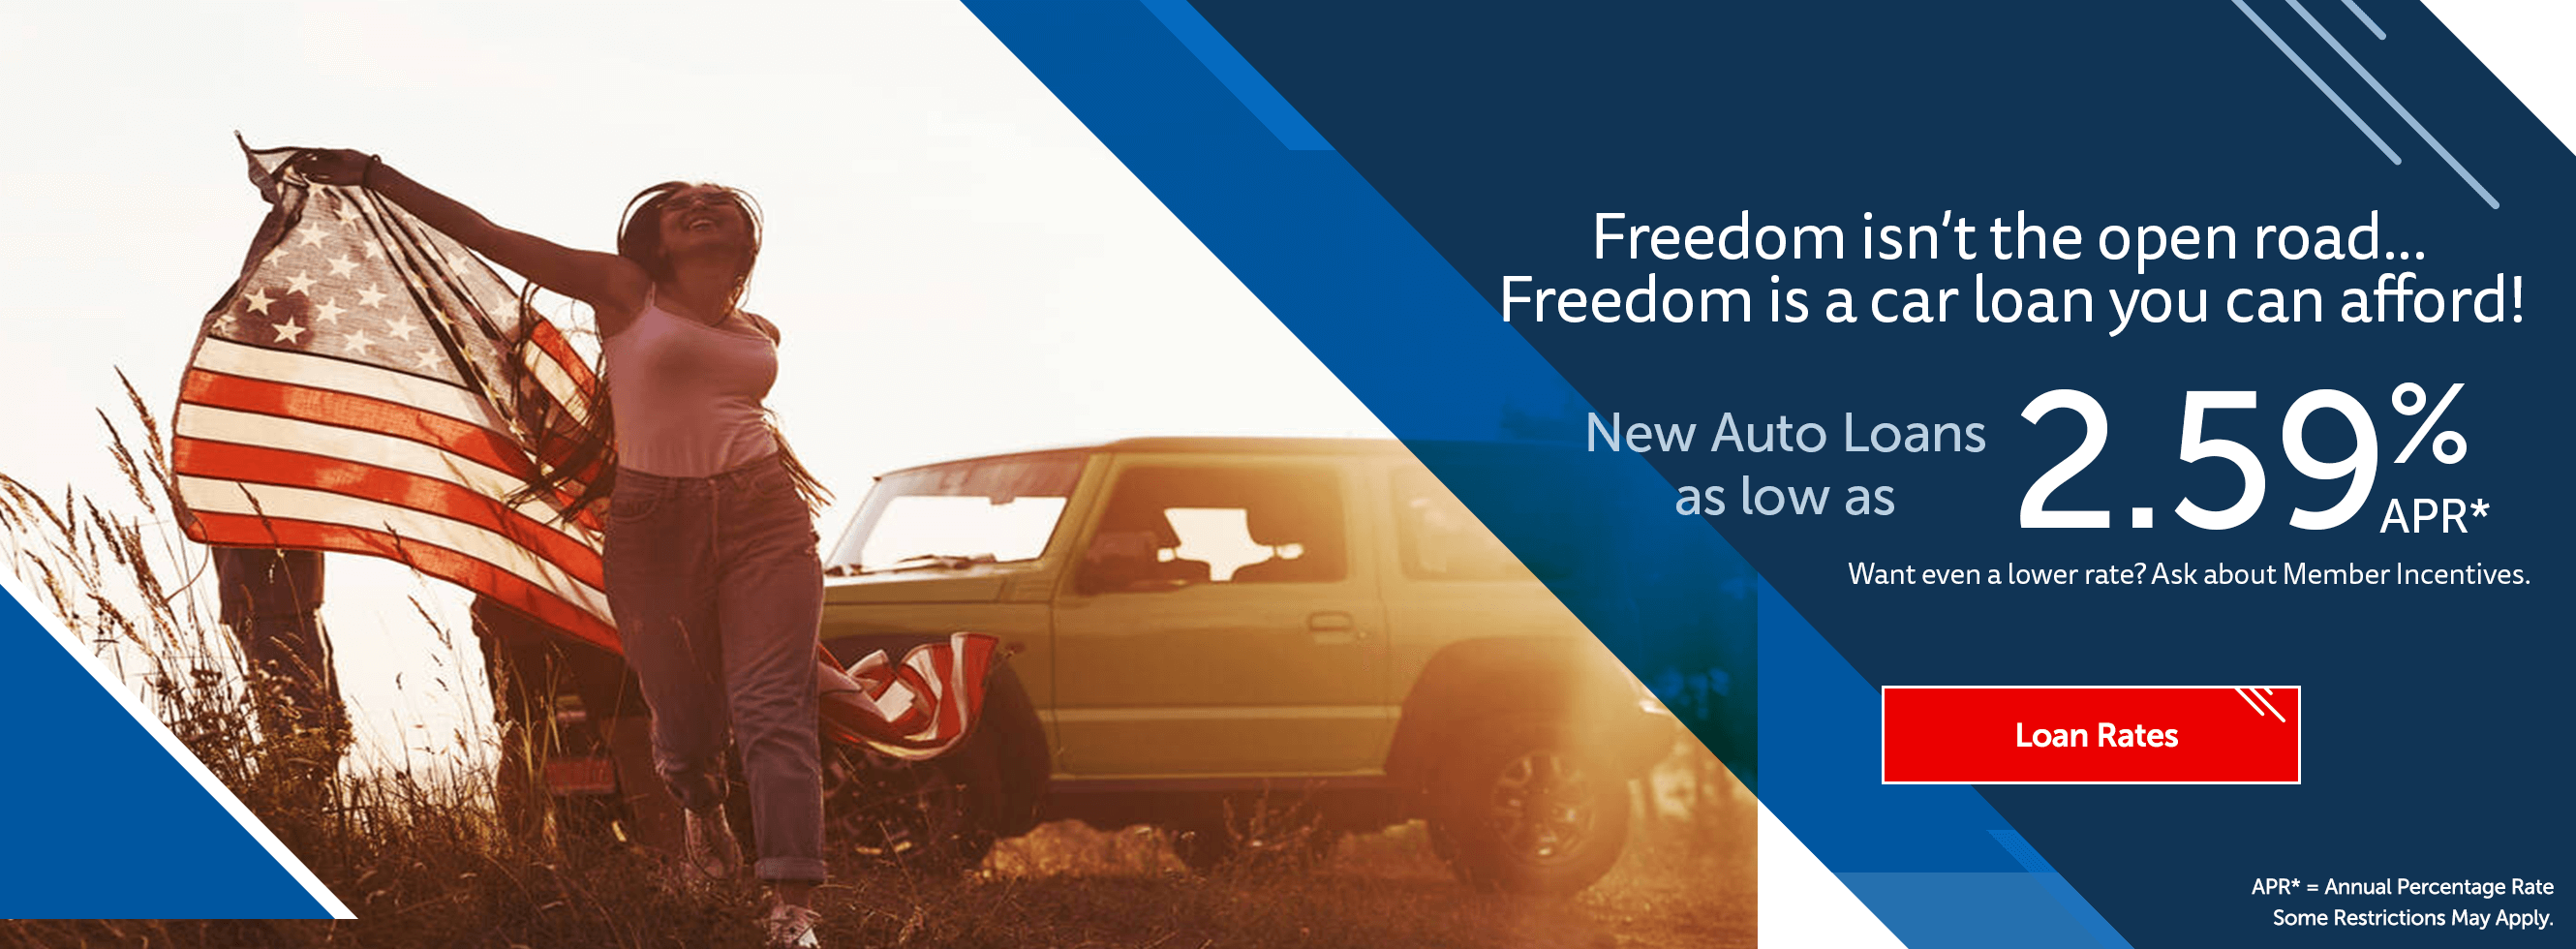 Freedom isn't the open road... Freedom is a car loan you can afford!